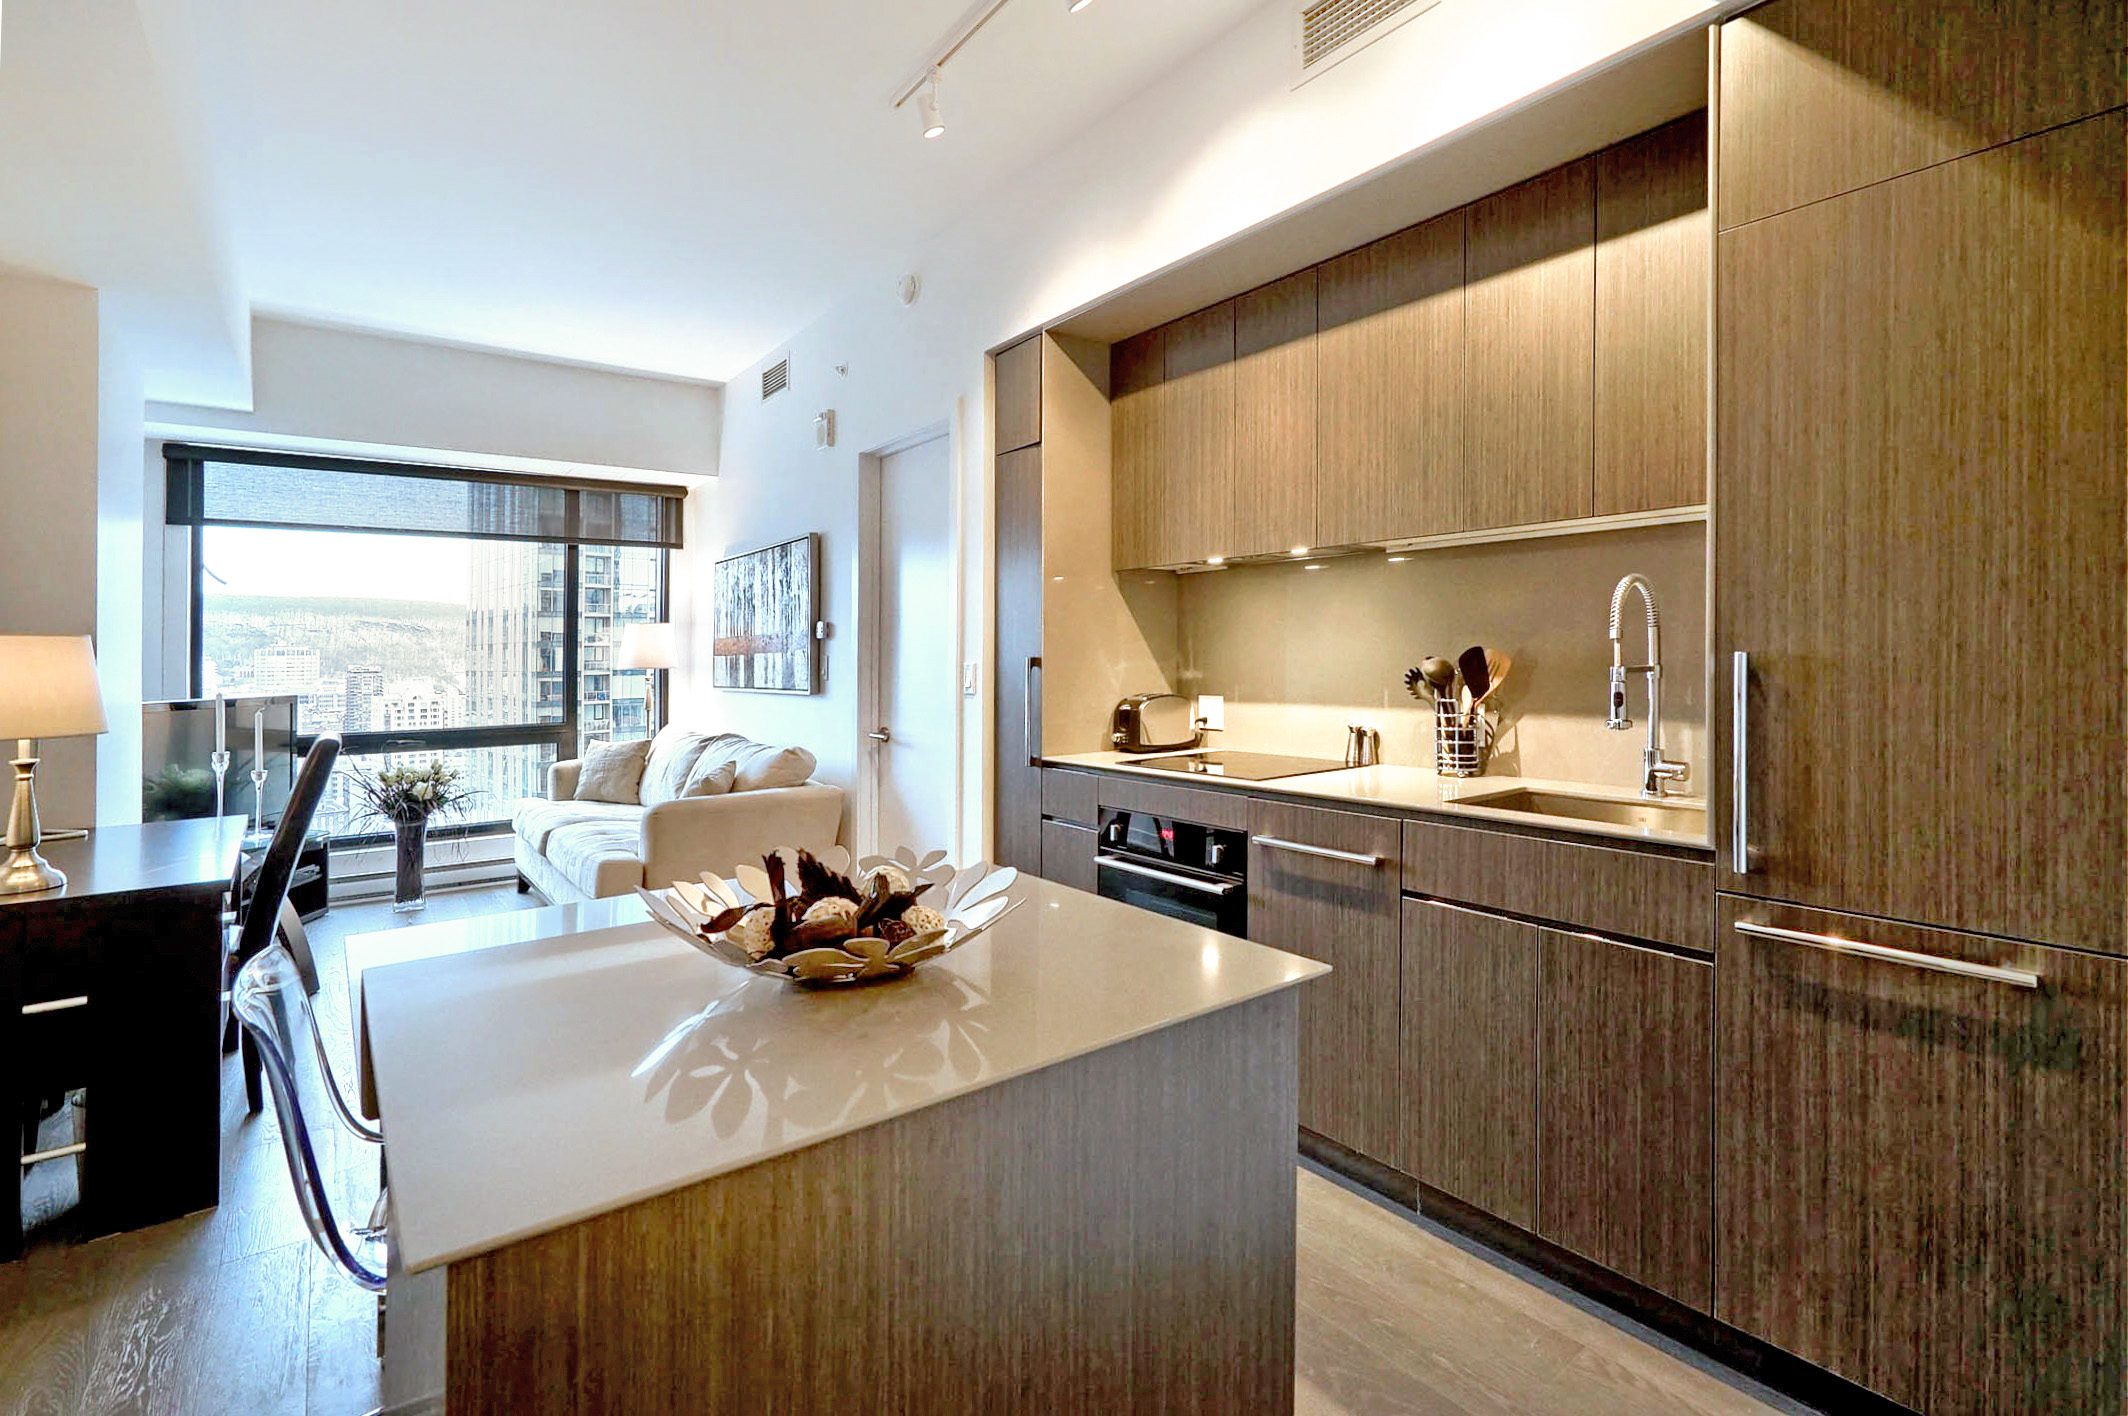 Angled view of the kitchen showing the refrigerator, sink and oven/stove. Bright and modern in this furnished corporate housing apartment in Montreal